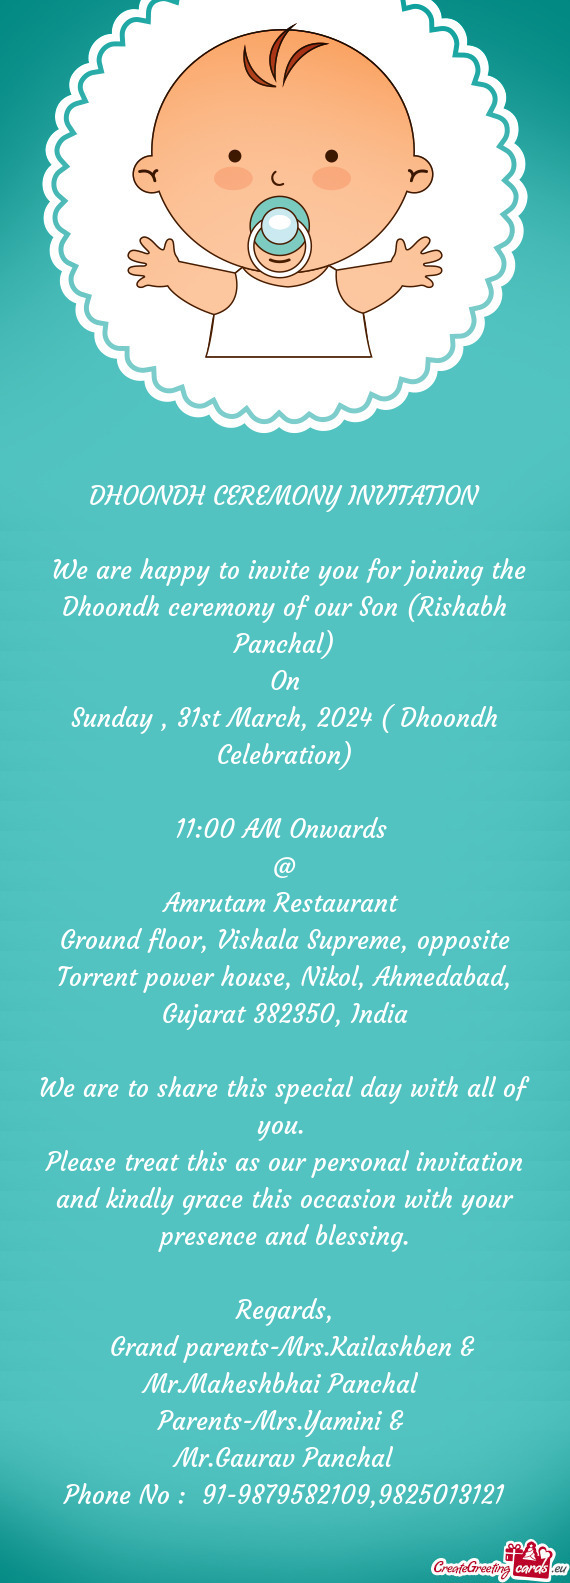 We are happy to invite you for joining the Dhoondh ceremony of our Son (Rishabh Panchal)